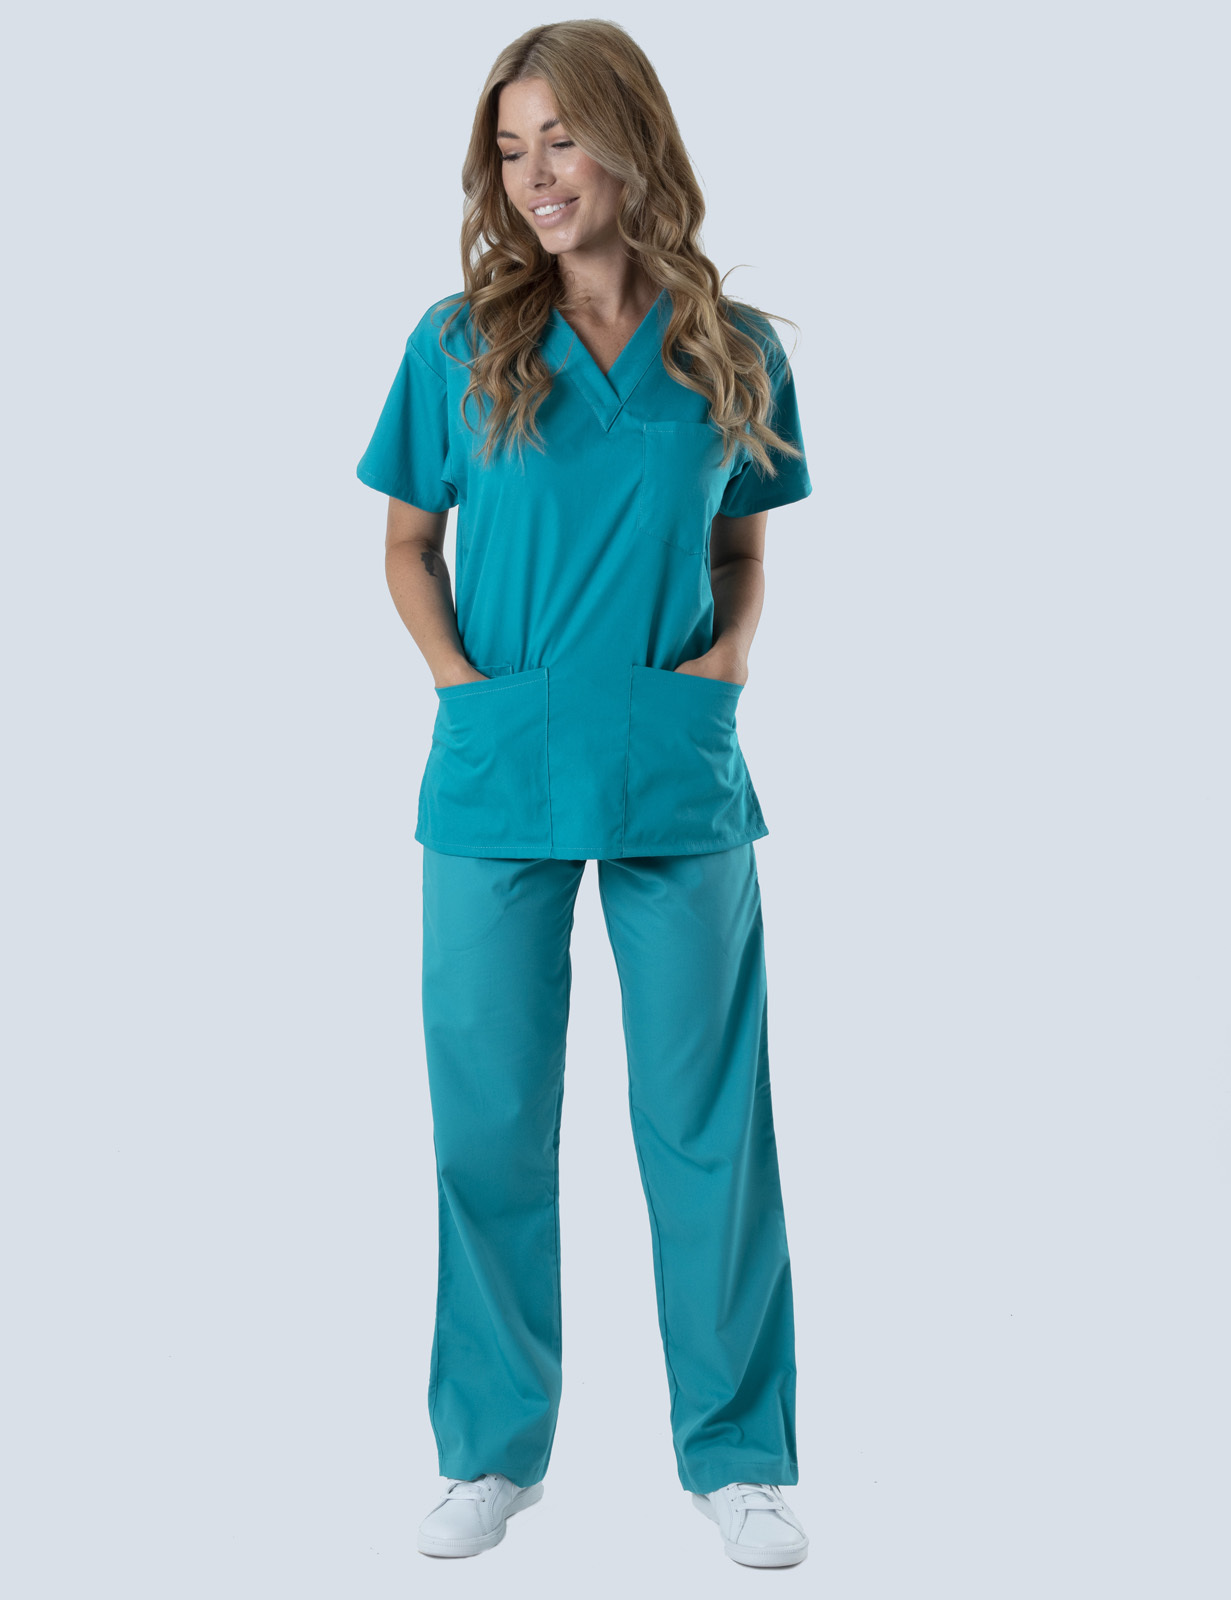 Nambour Hospital - AIN (4 Pocket Scrub Top and Cargo Pants in Teal incl Logos)